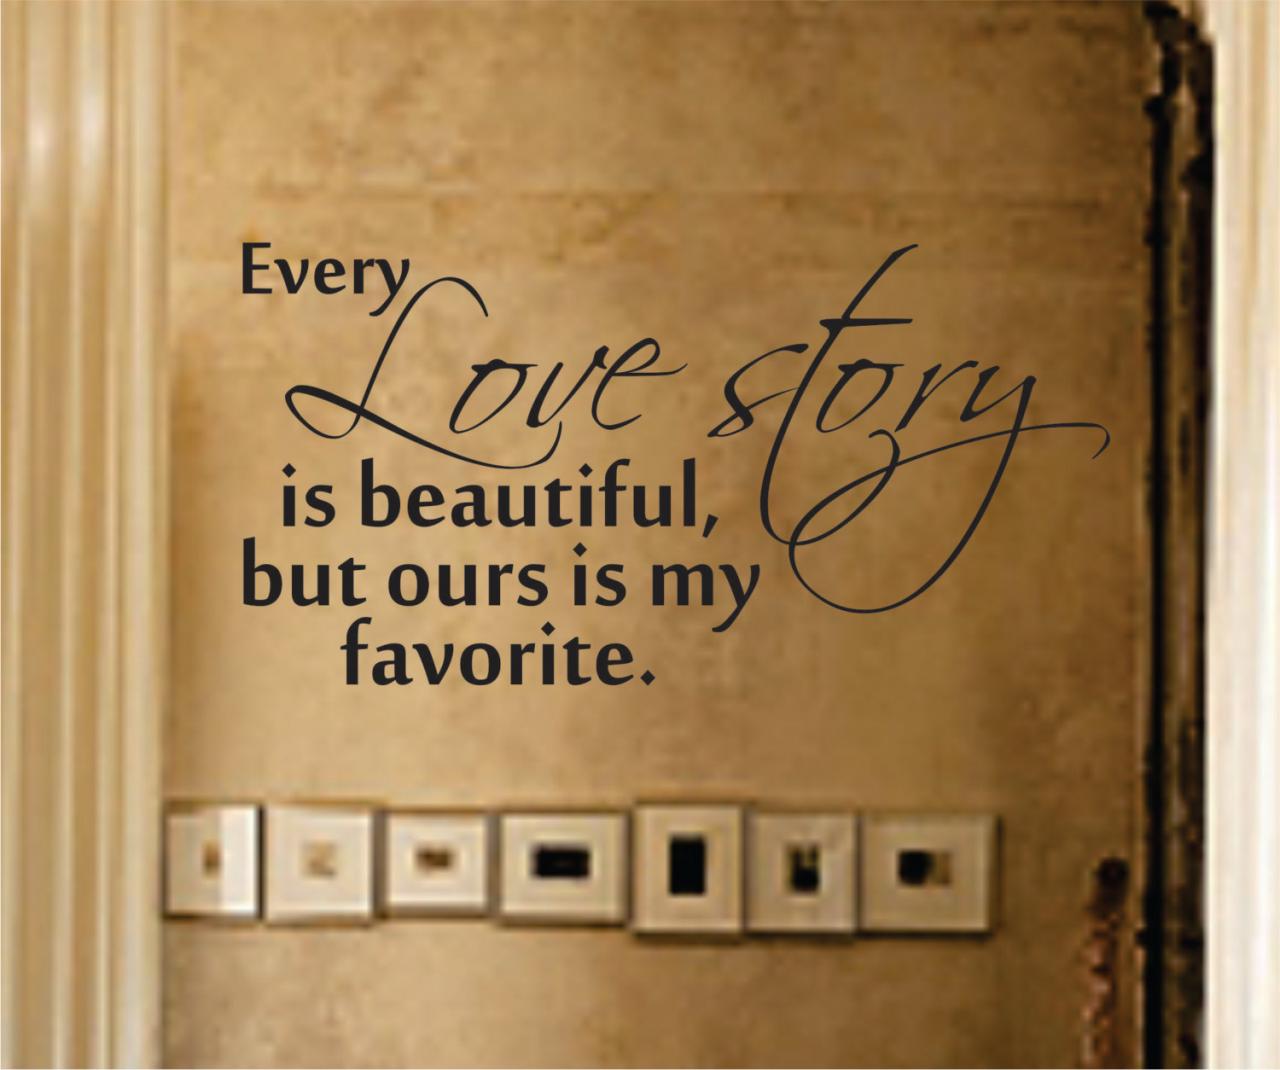 Wall Decal Quotes - Every Love Story is Beautiful Decal Sticker Wall Graphic Art Quote